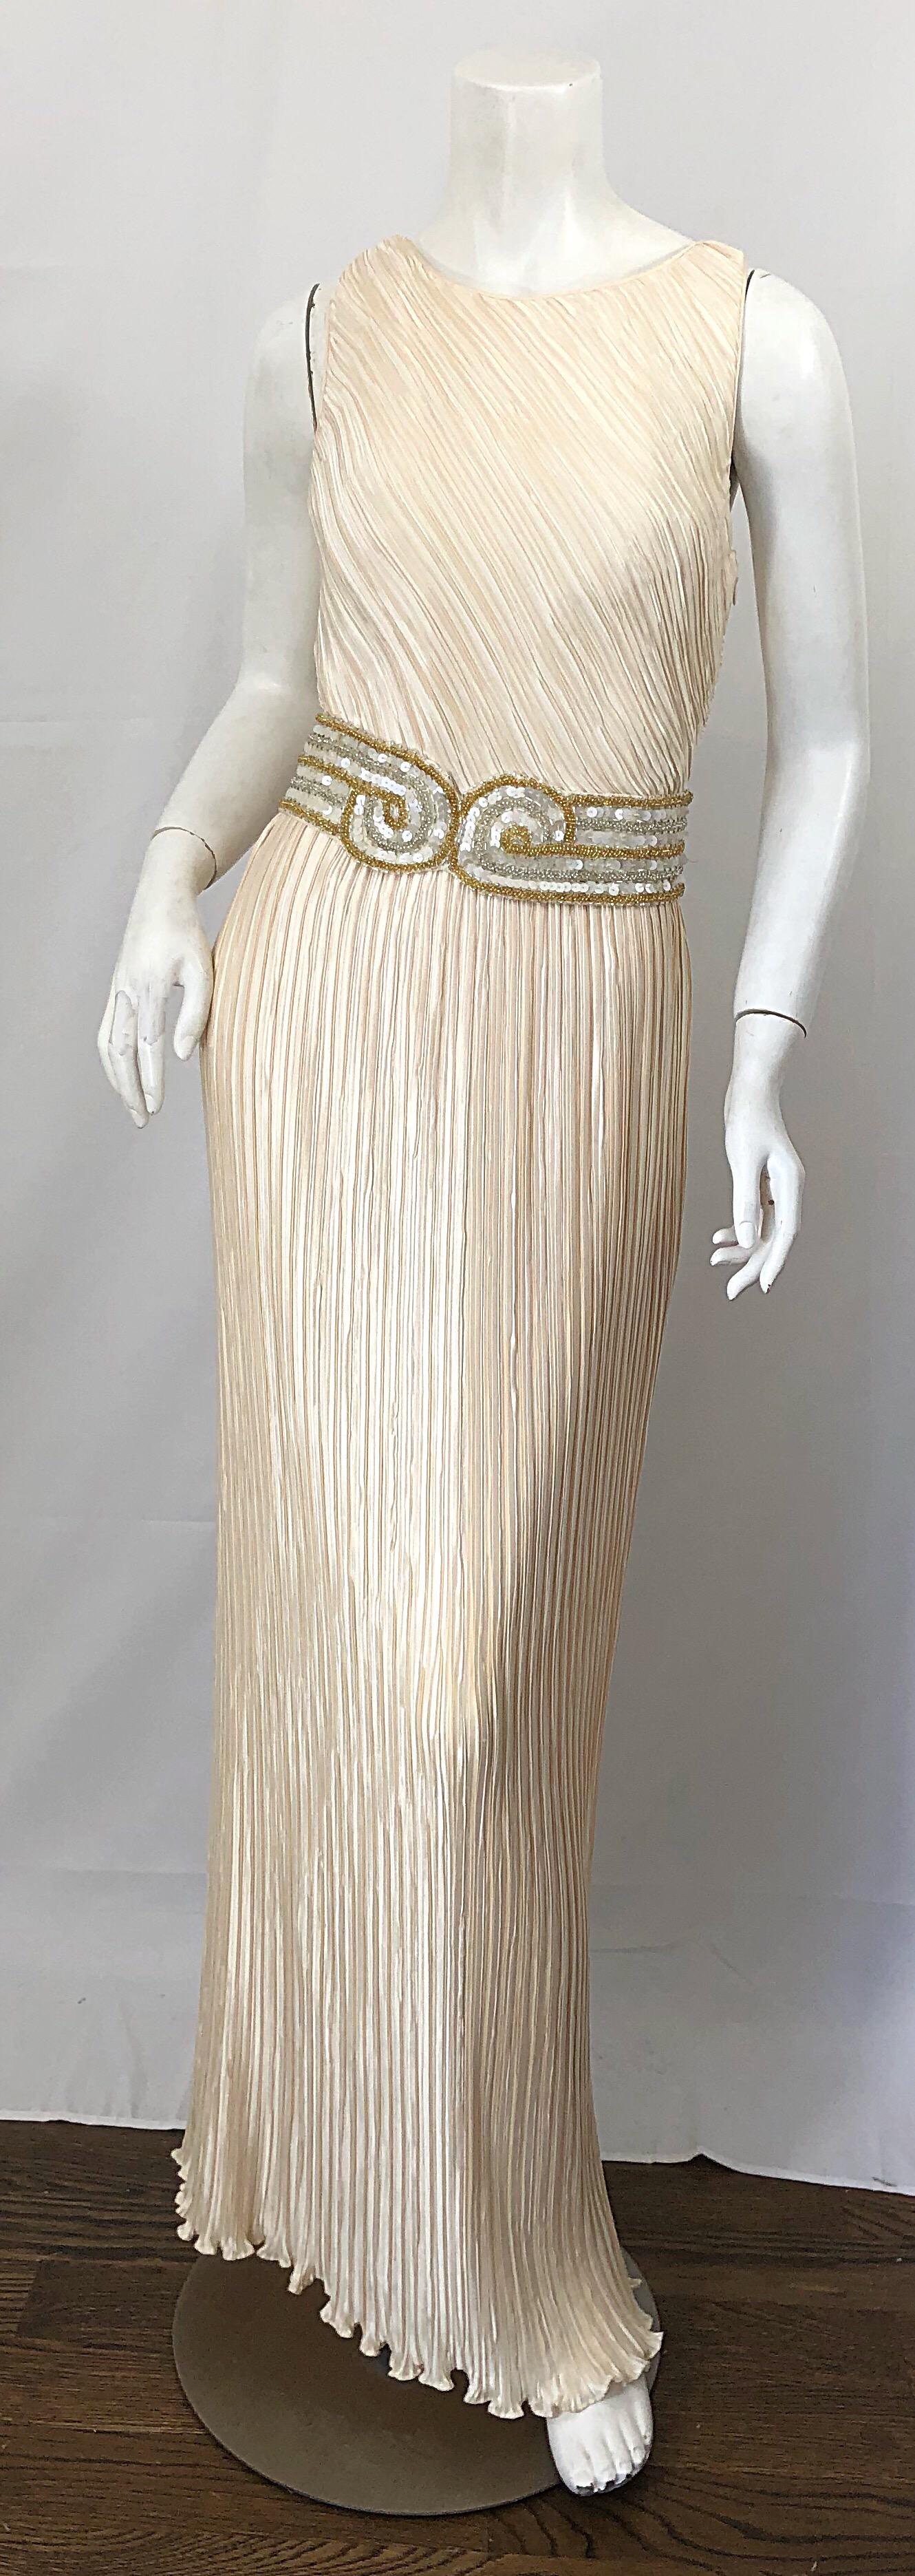 Stunning 1990s does 1920s vintage GEORGE F. COUTURE for LILLIE RUBIN ivory and gold fortune pleated sequin and beaded Grecian gown! Features a flattering fortuney pleated fabric that has so much give. Beaded cross-cross back reveals just the right